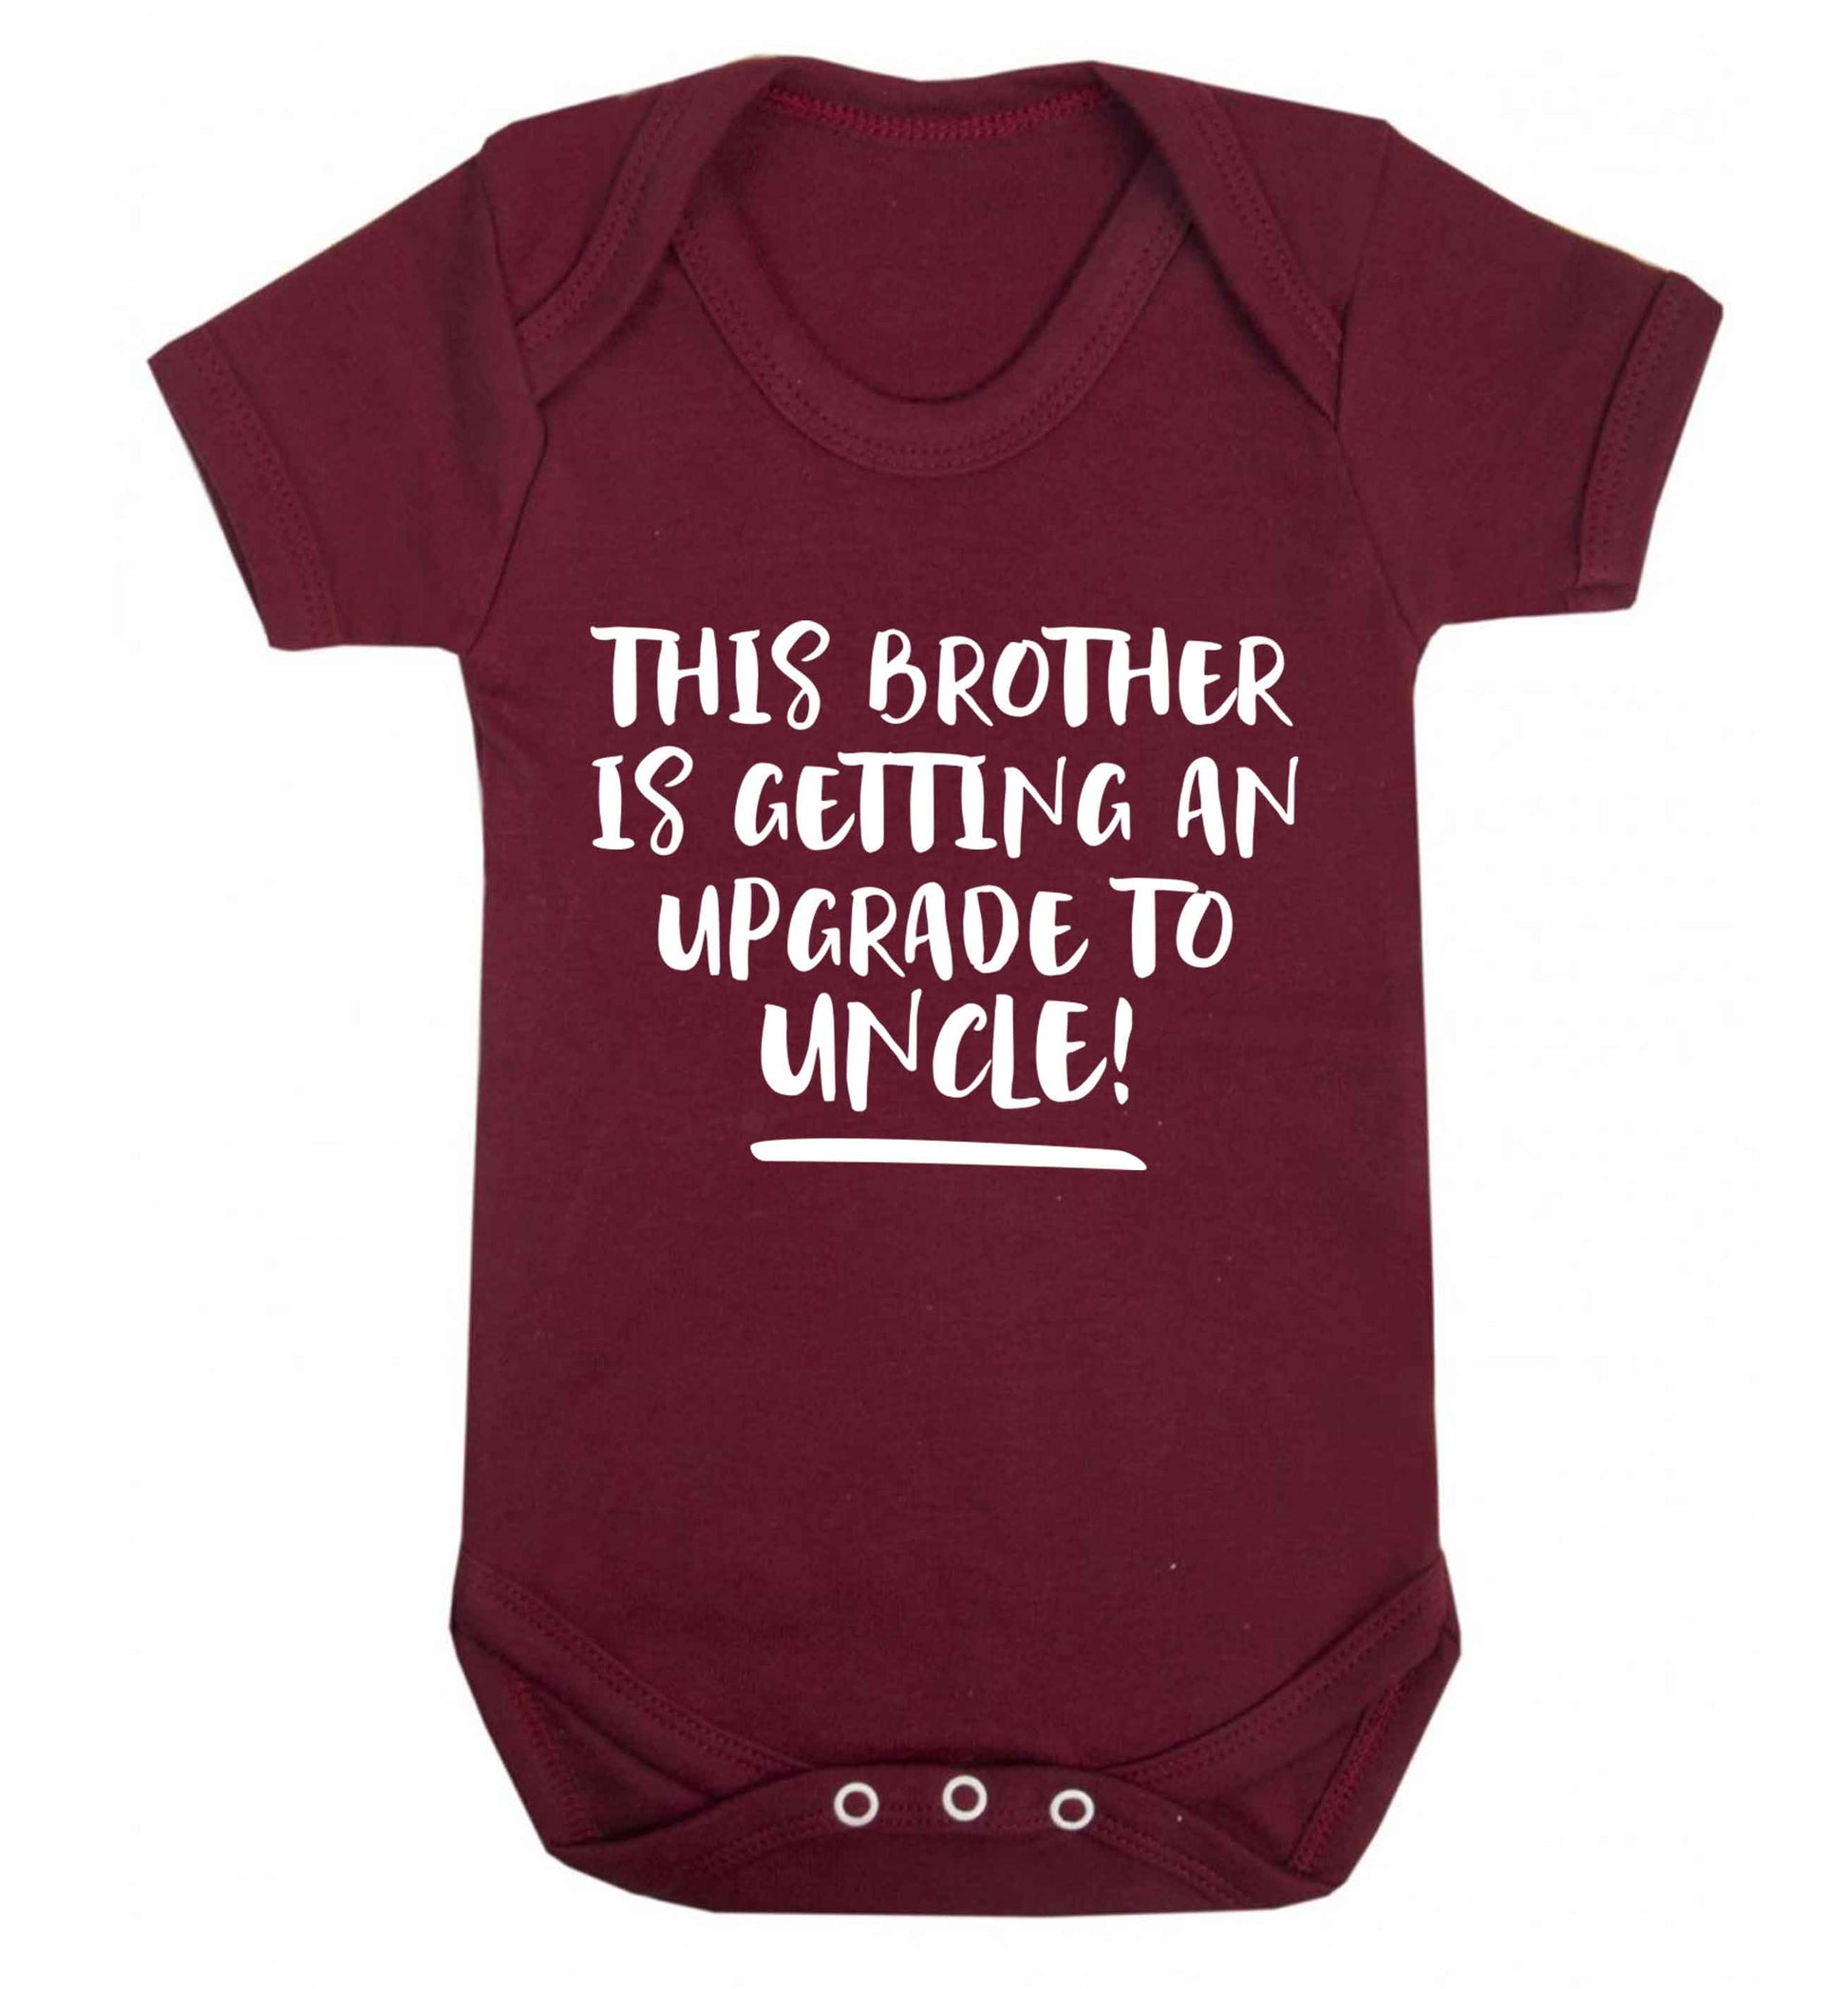 This brother is getting an upgrade to uncle! Baby Vest maroon 18-24 months